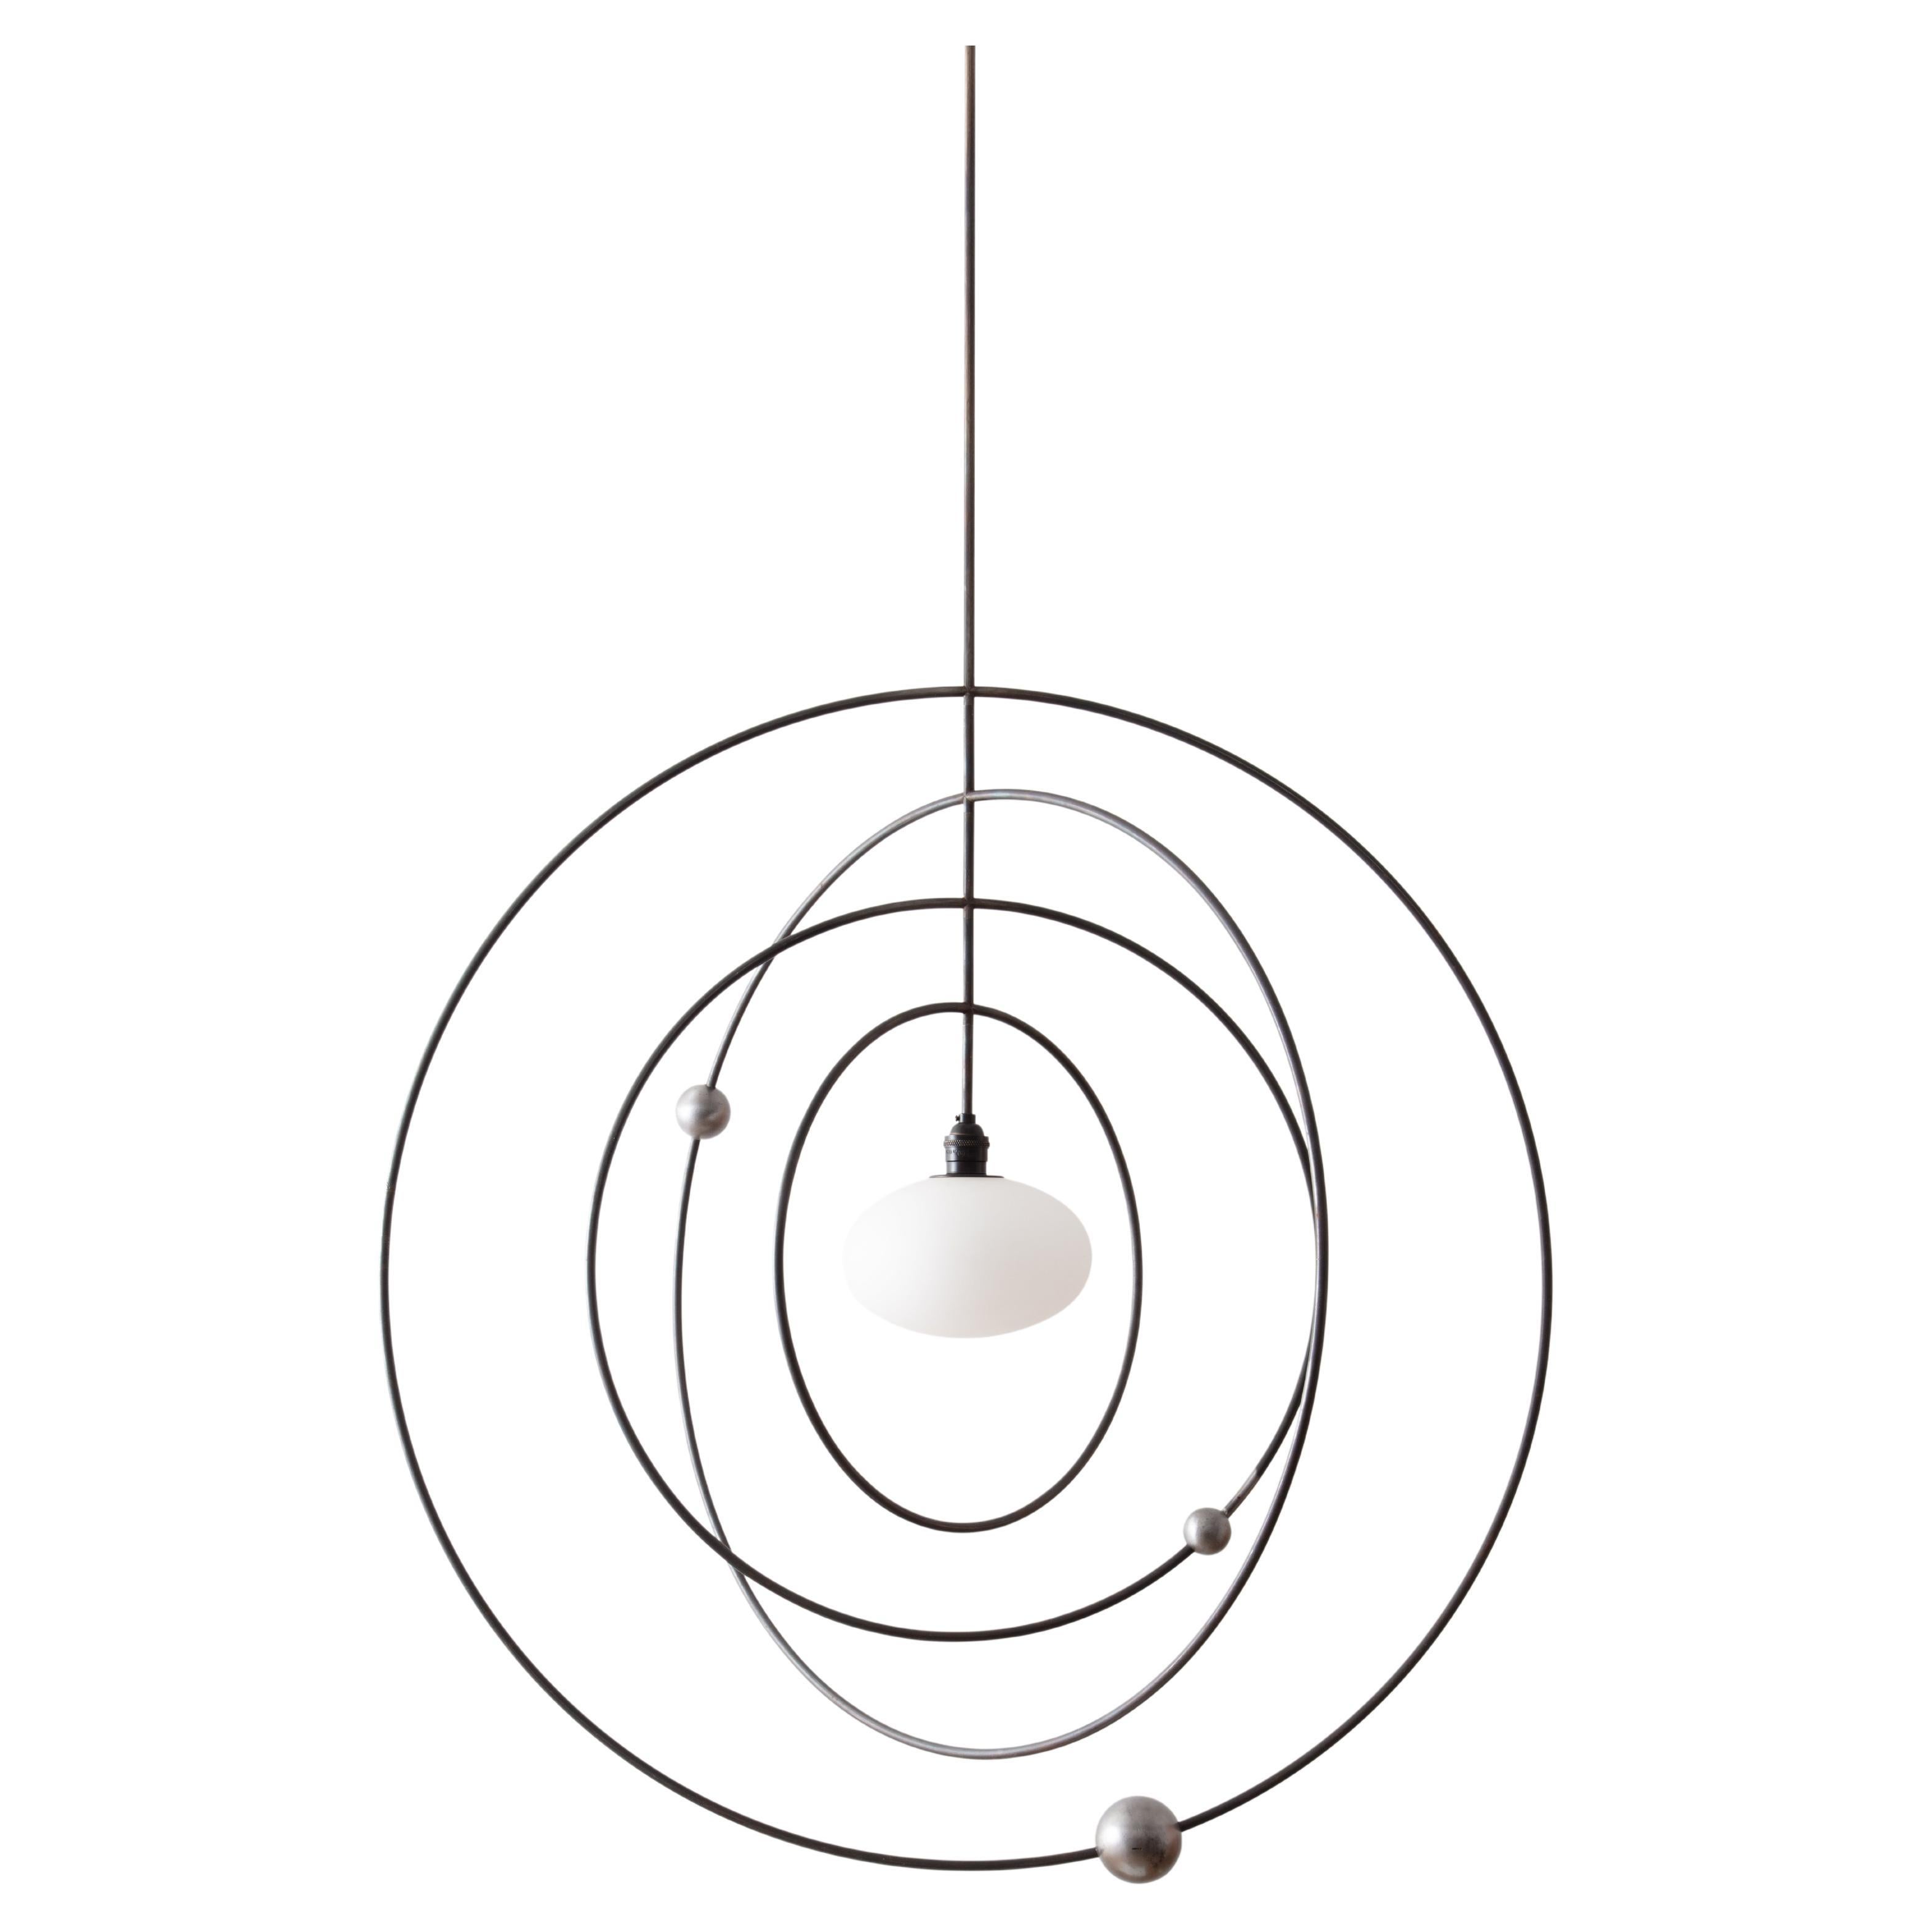 Orbit Mobile Pendant Kinetic Sculpture w/ Blown Glass and Adorned Steel Rings